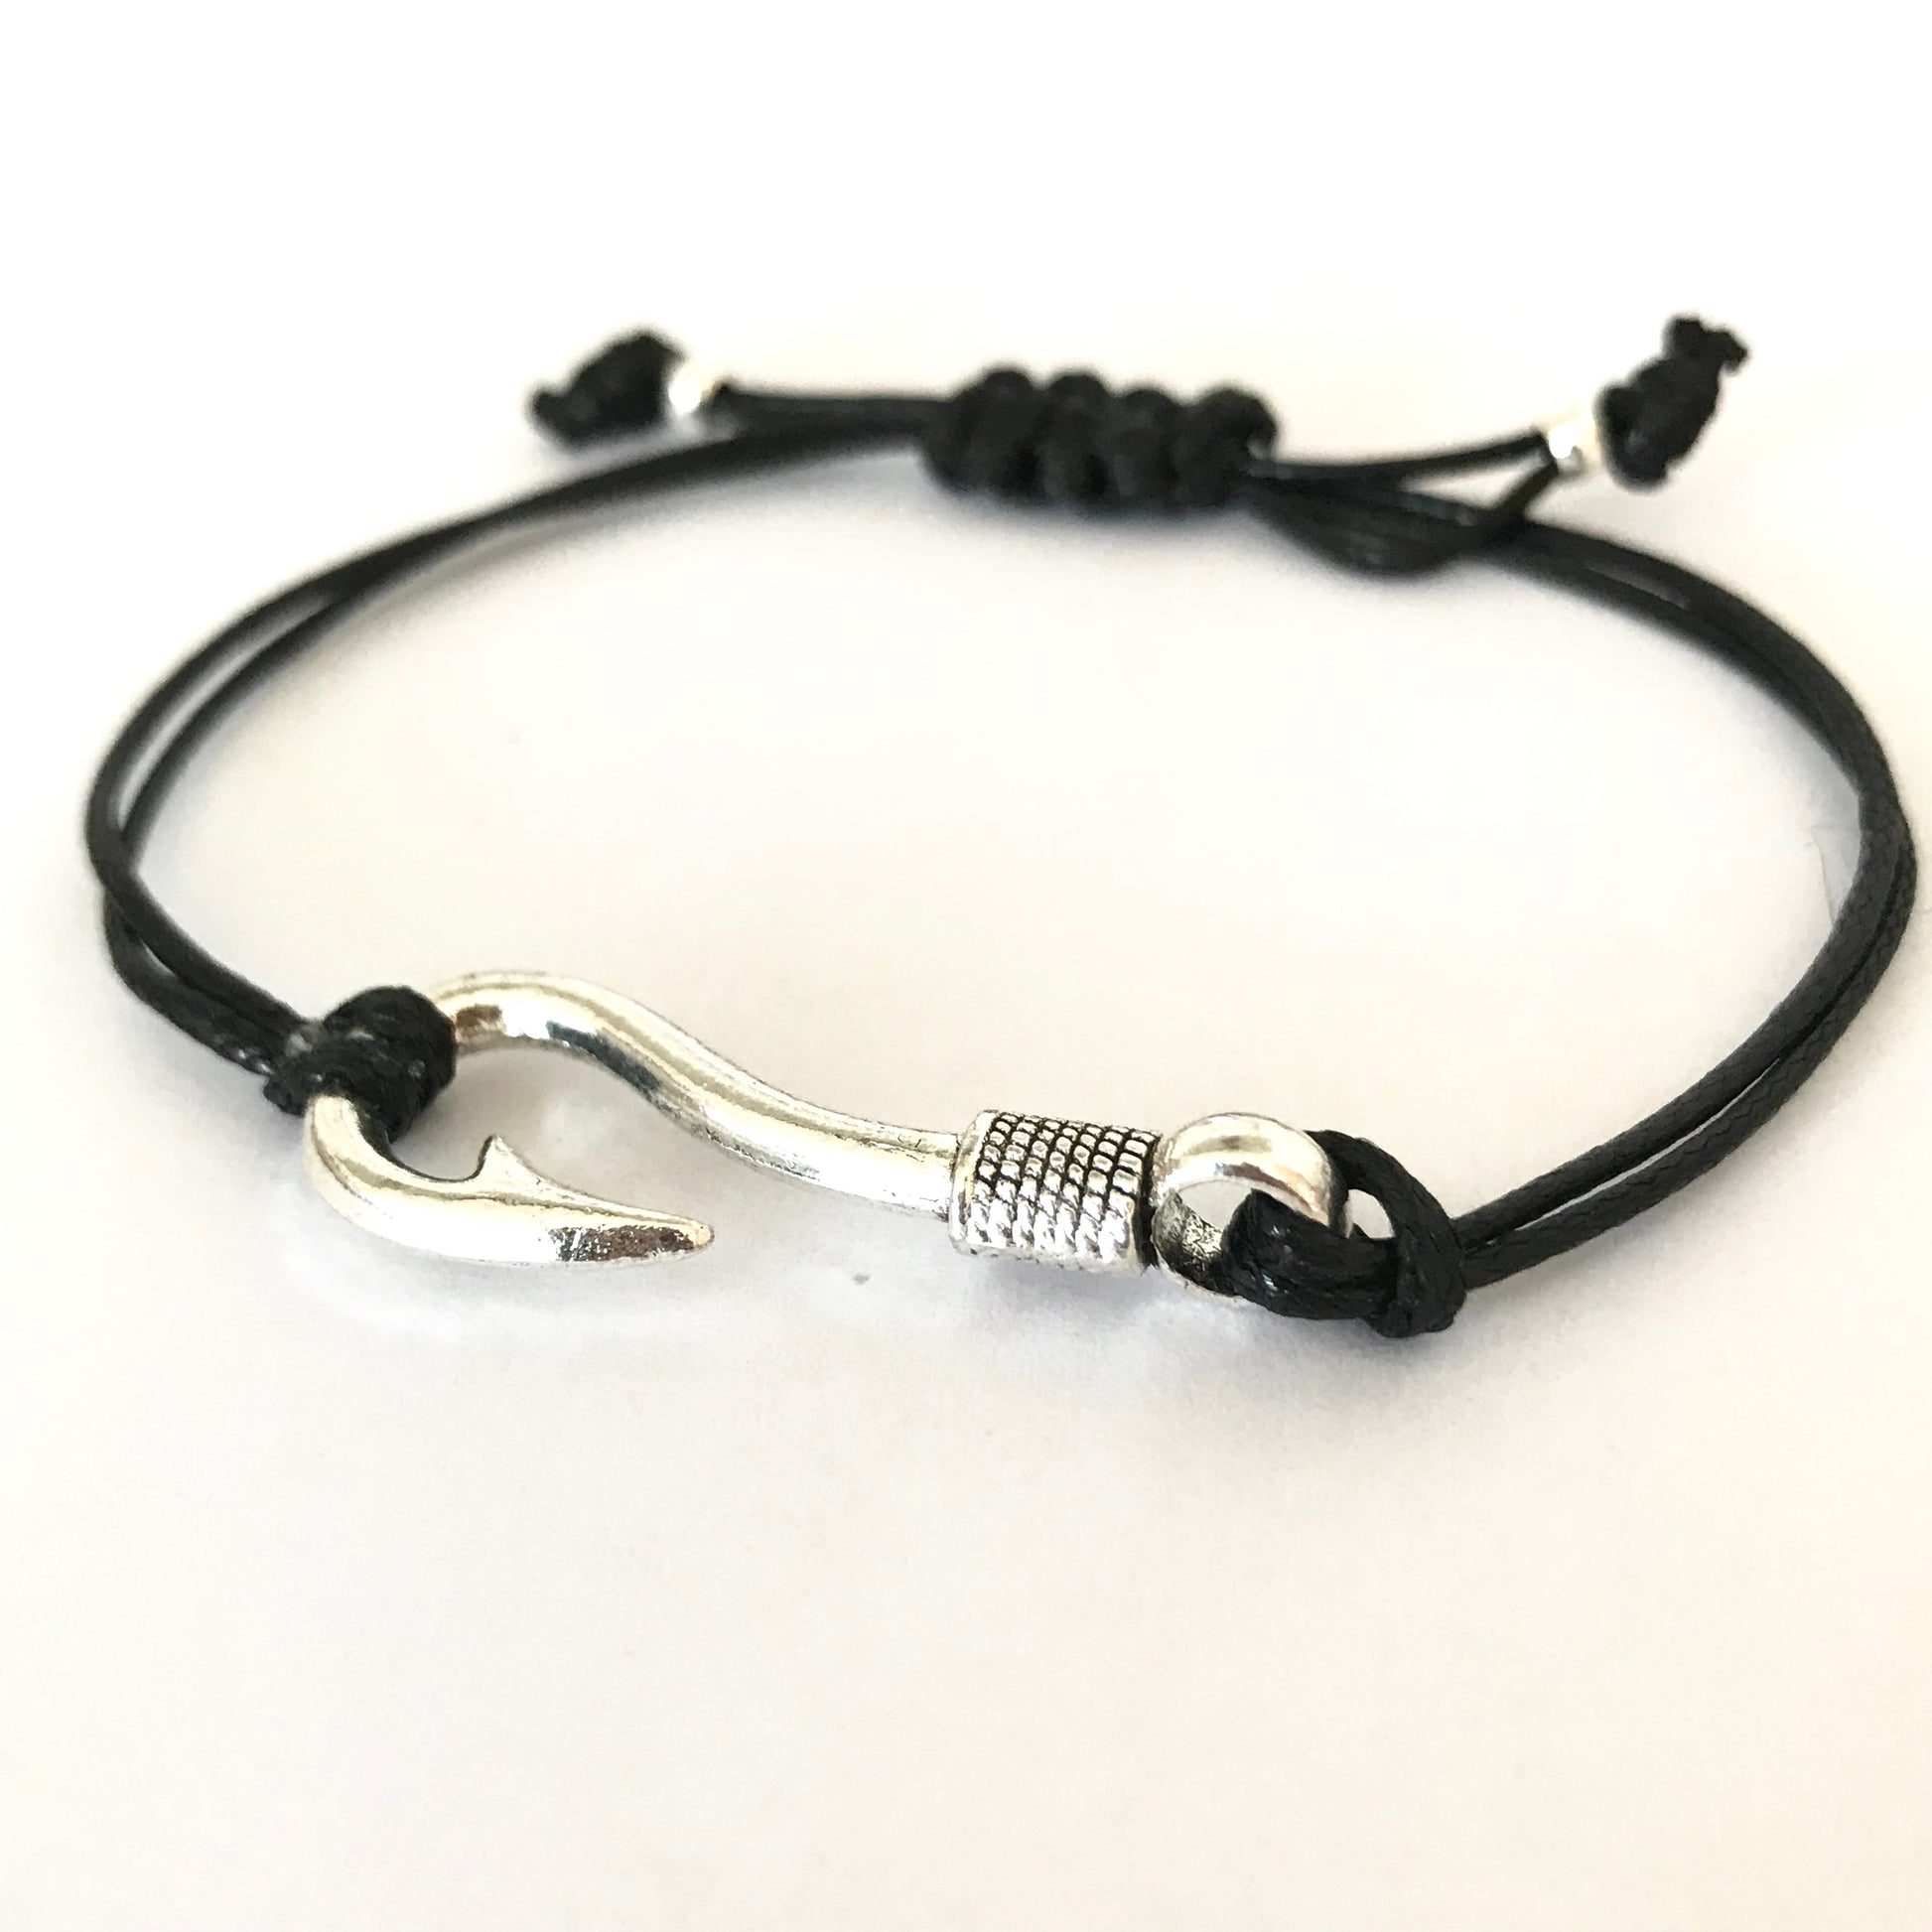 Matching bracelets for couples, Couples gifts, Hooked on you